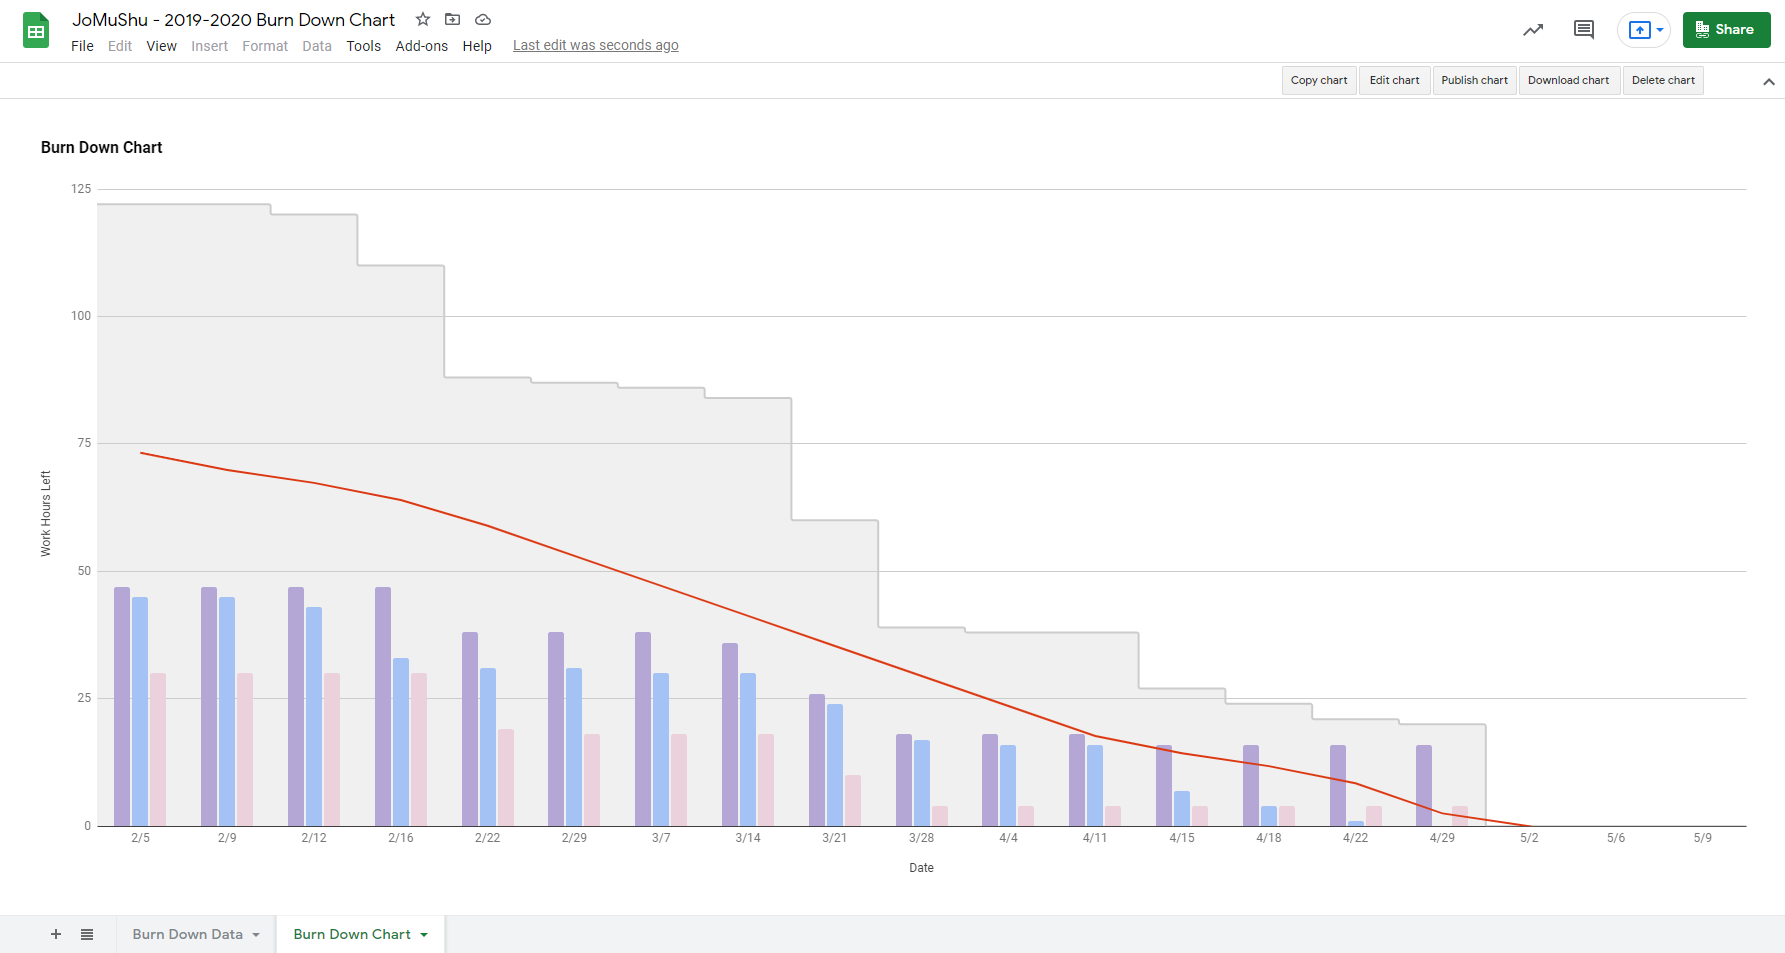  Burndown Chart Line Graph showing our task load throughout Production phase 